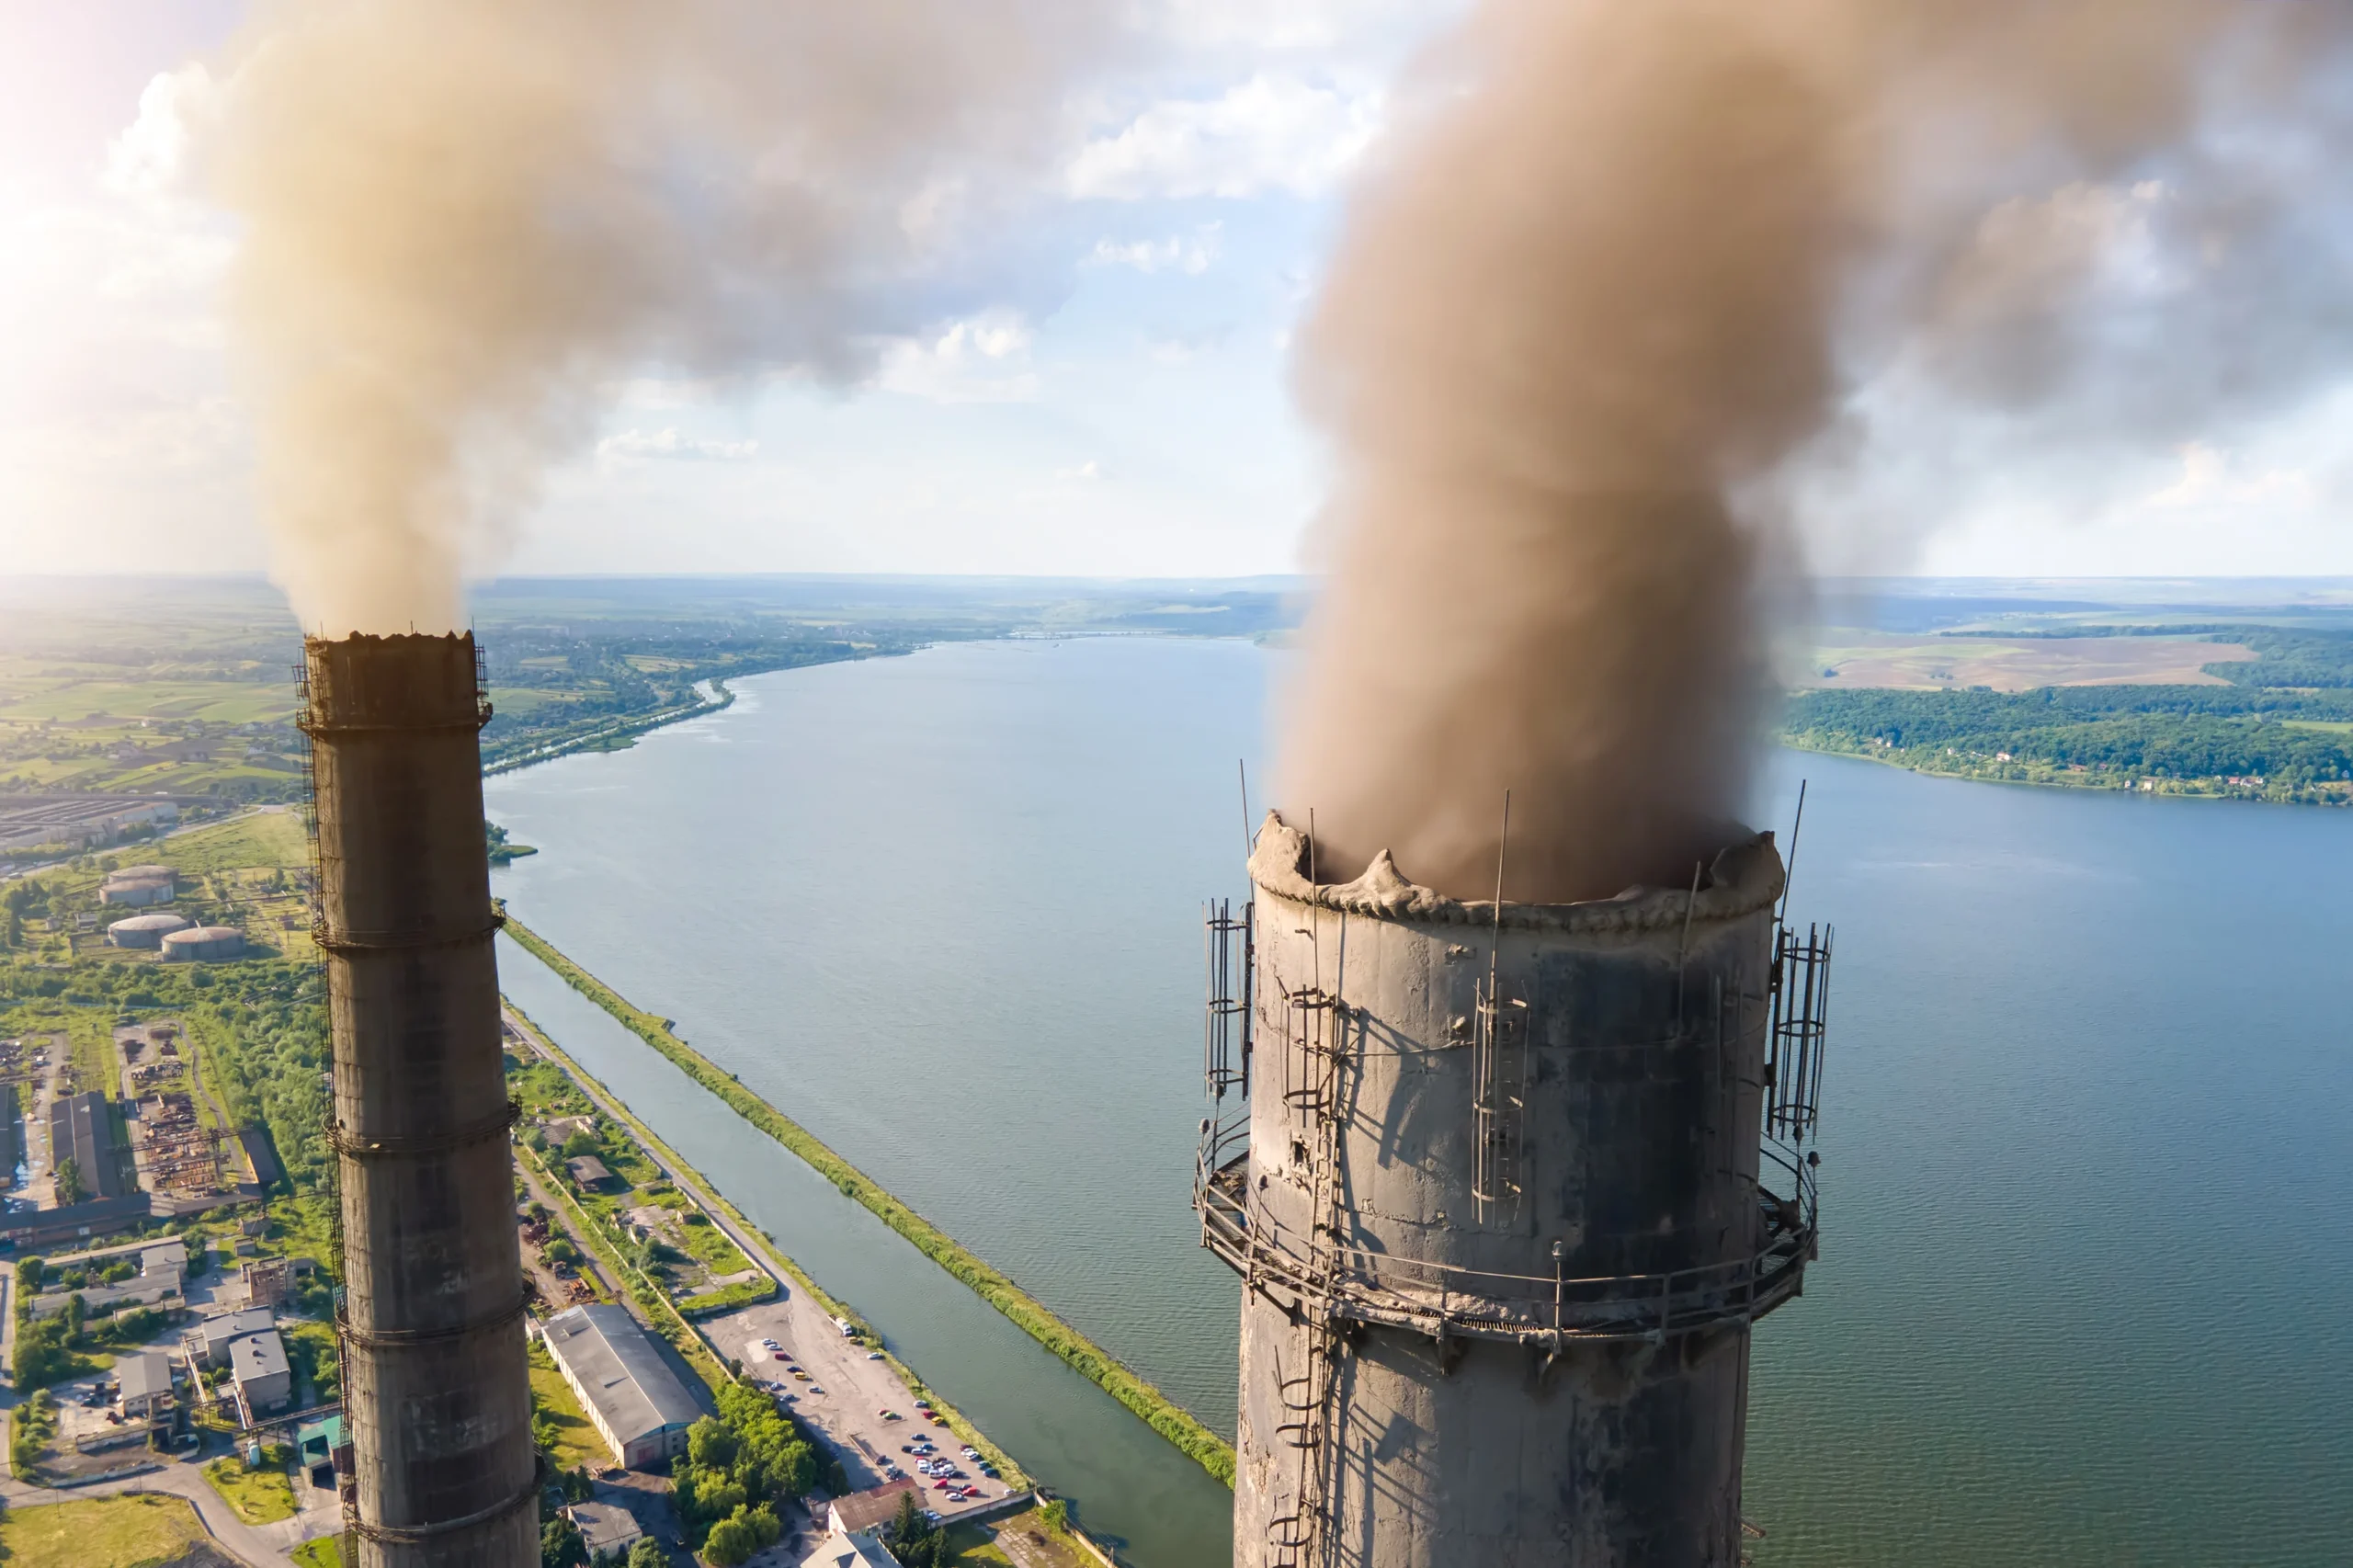 Germany unlikely to achieve 2030 coal phase-out: Cornwall Insight